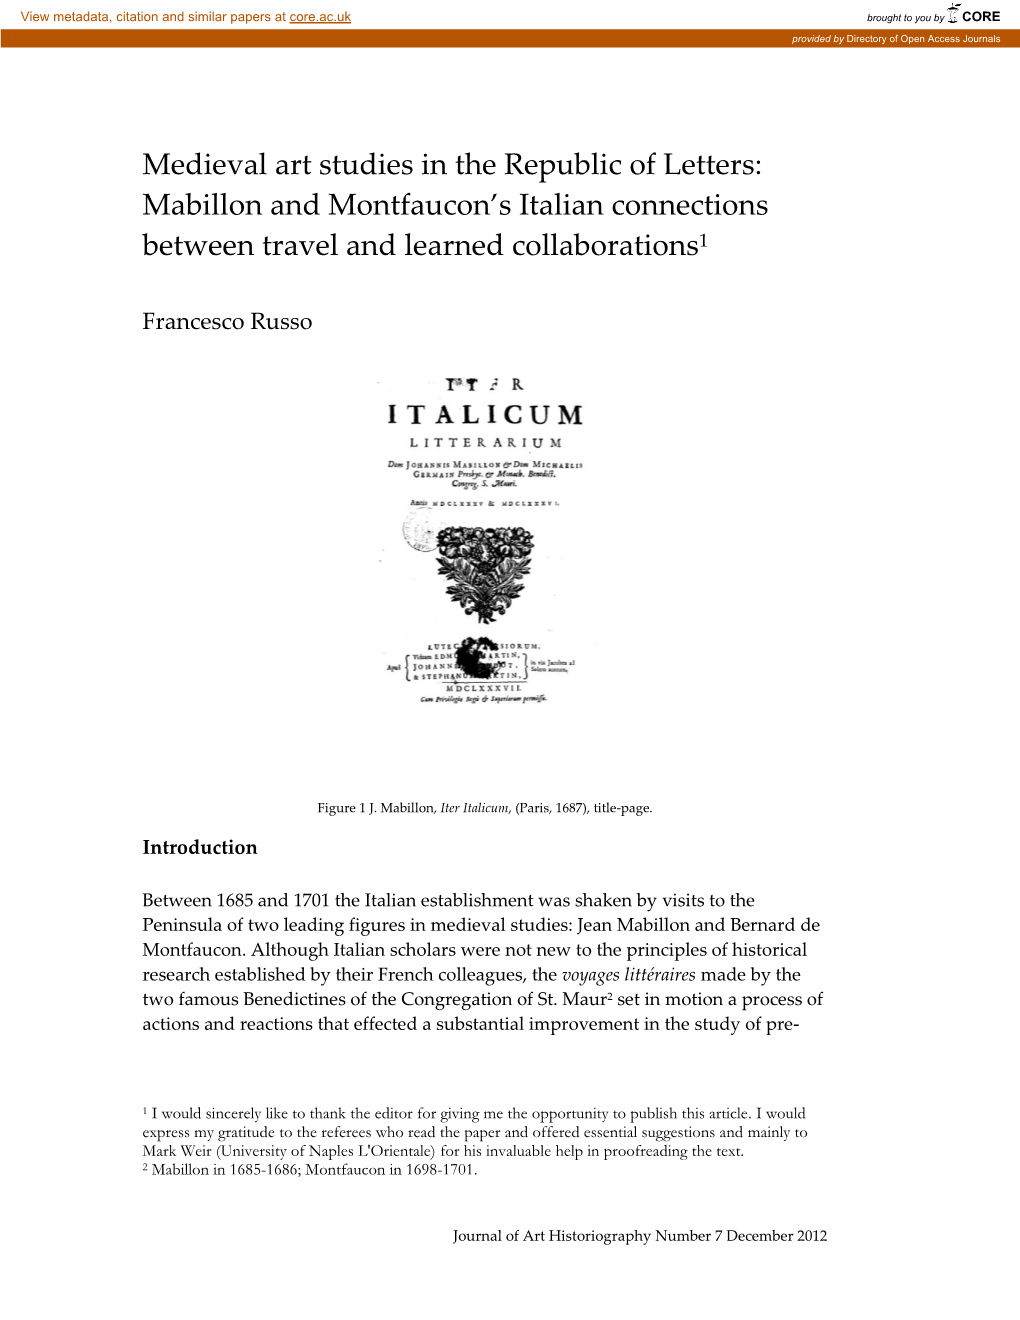 Mabillon and Montfaucon's Italian Connections Between Travel and Learned Coll